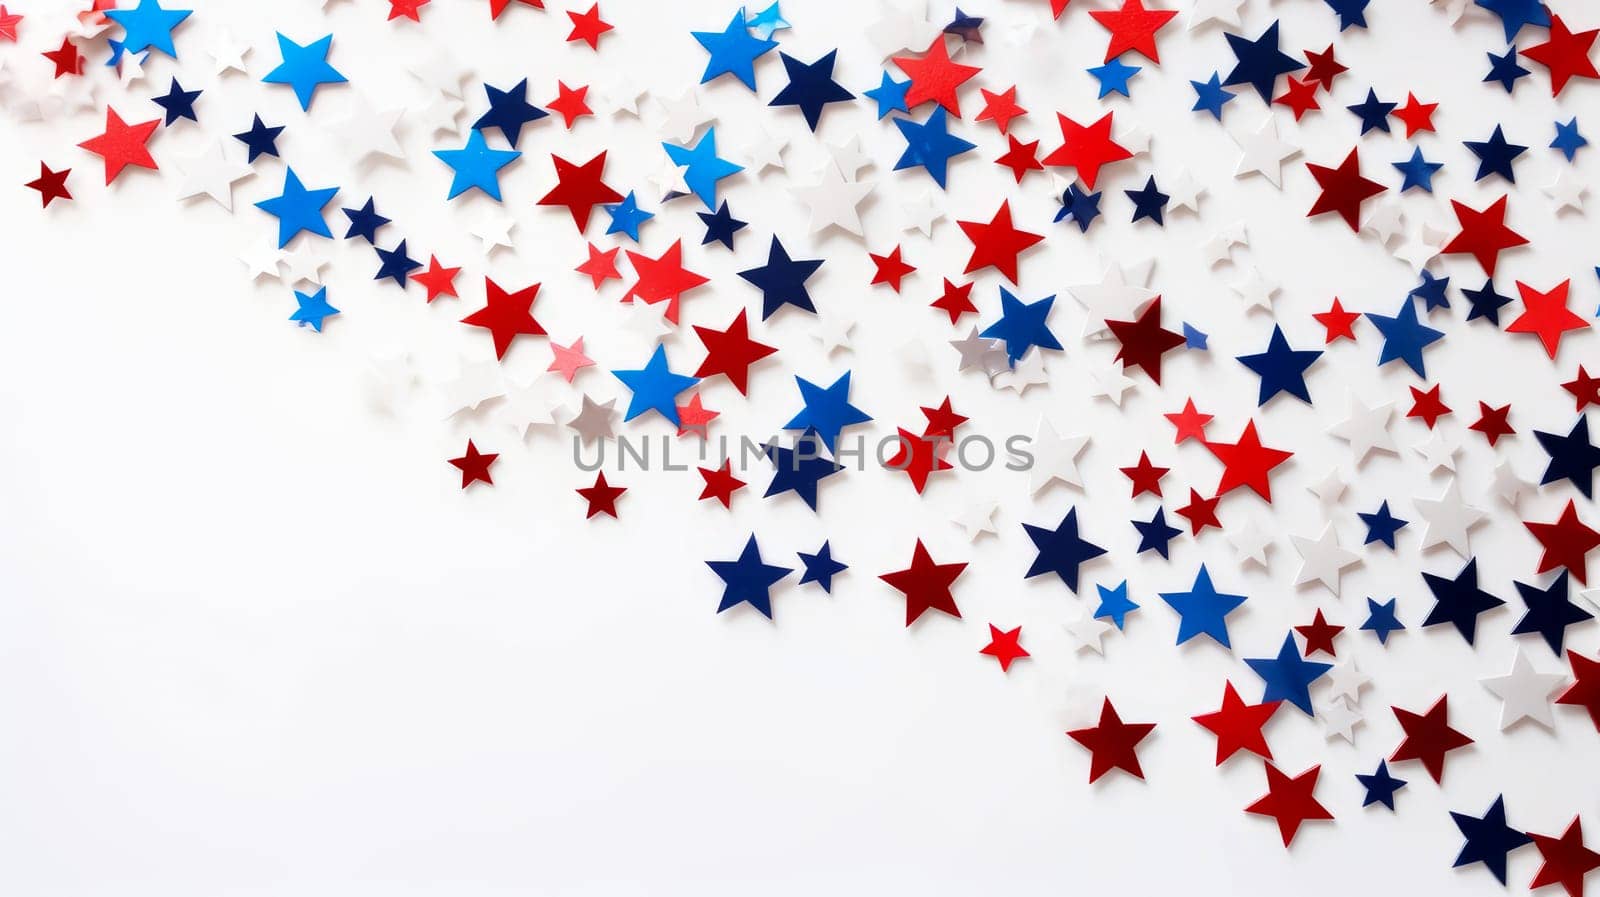 Star confetti in the colors of the United States of America flag on a white background. by Alla_Yurtayeva